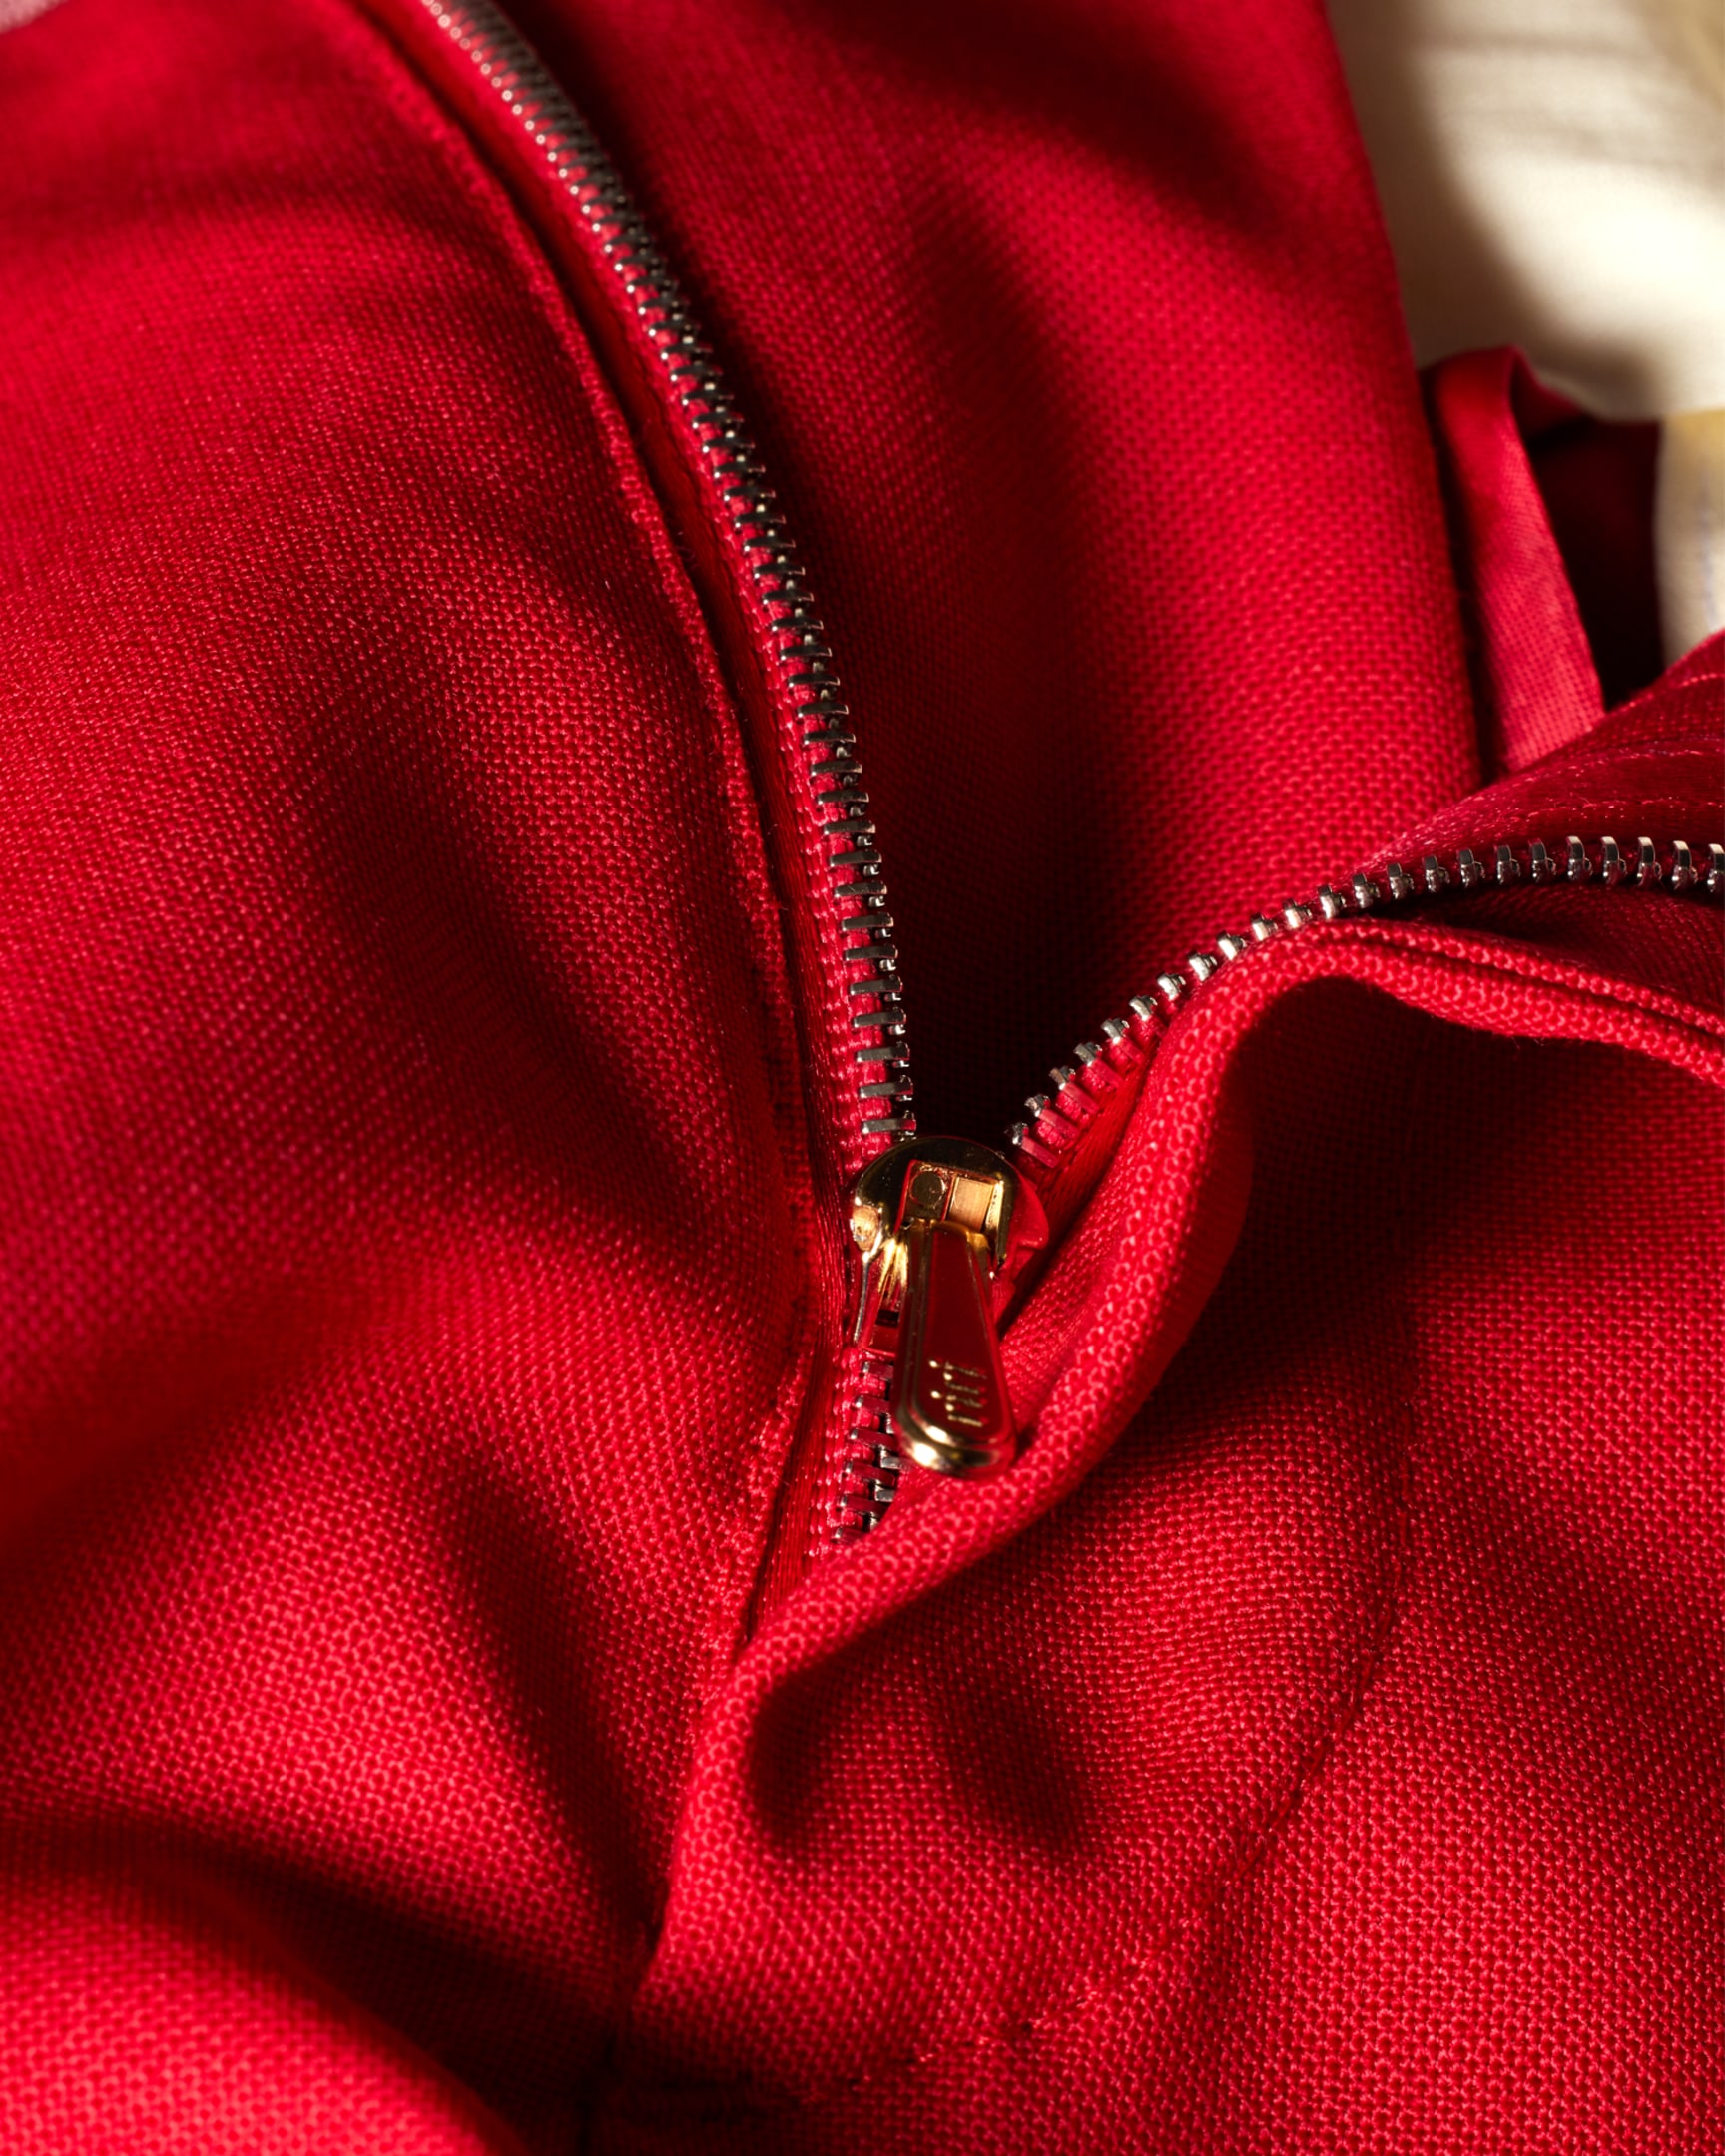 Detail View - Red Fresco Wool Trousers Paul Smith